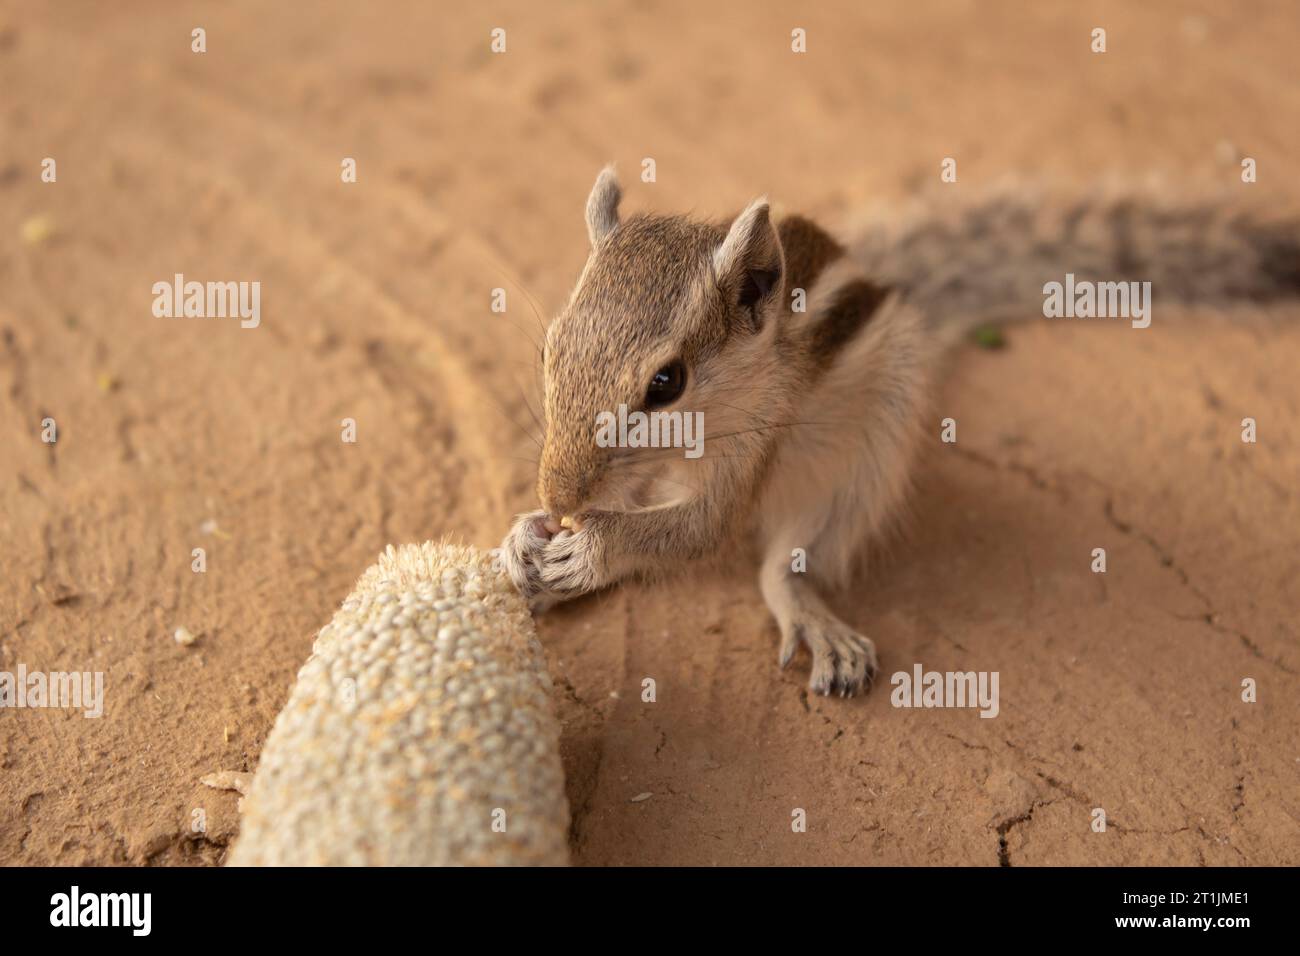 Squirrel in India eating millet from cobs on the ground Stock Photo